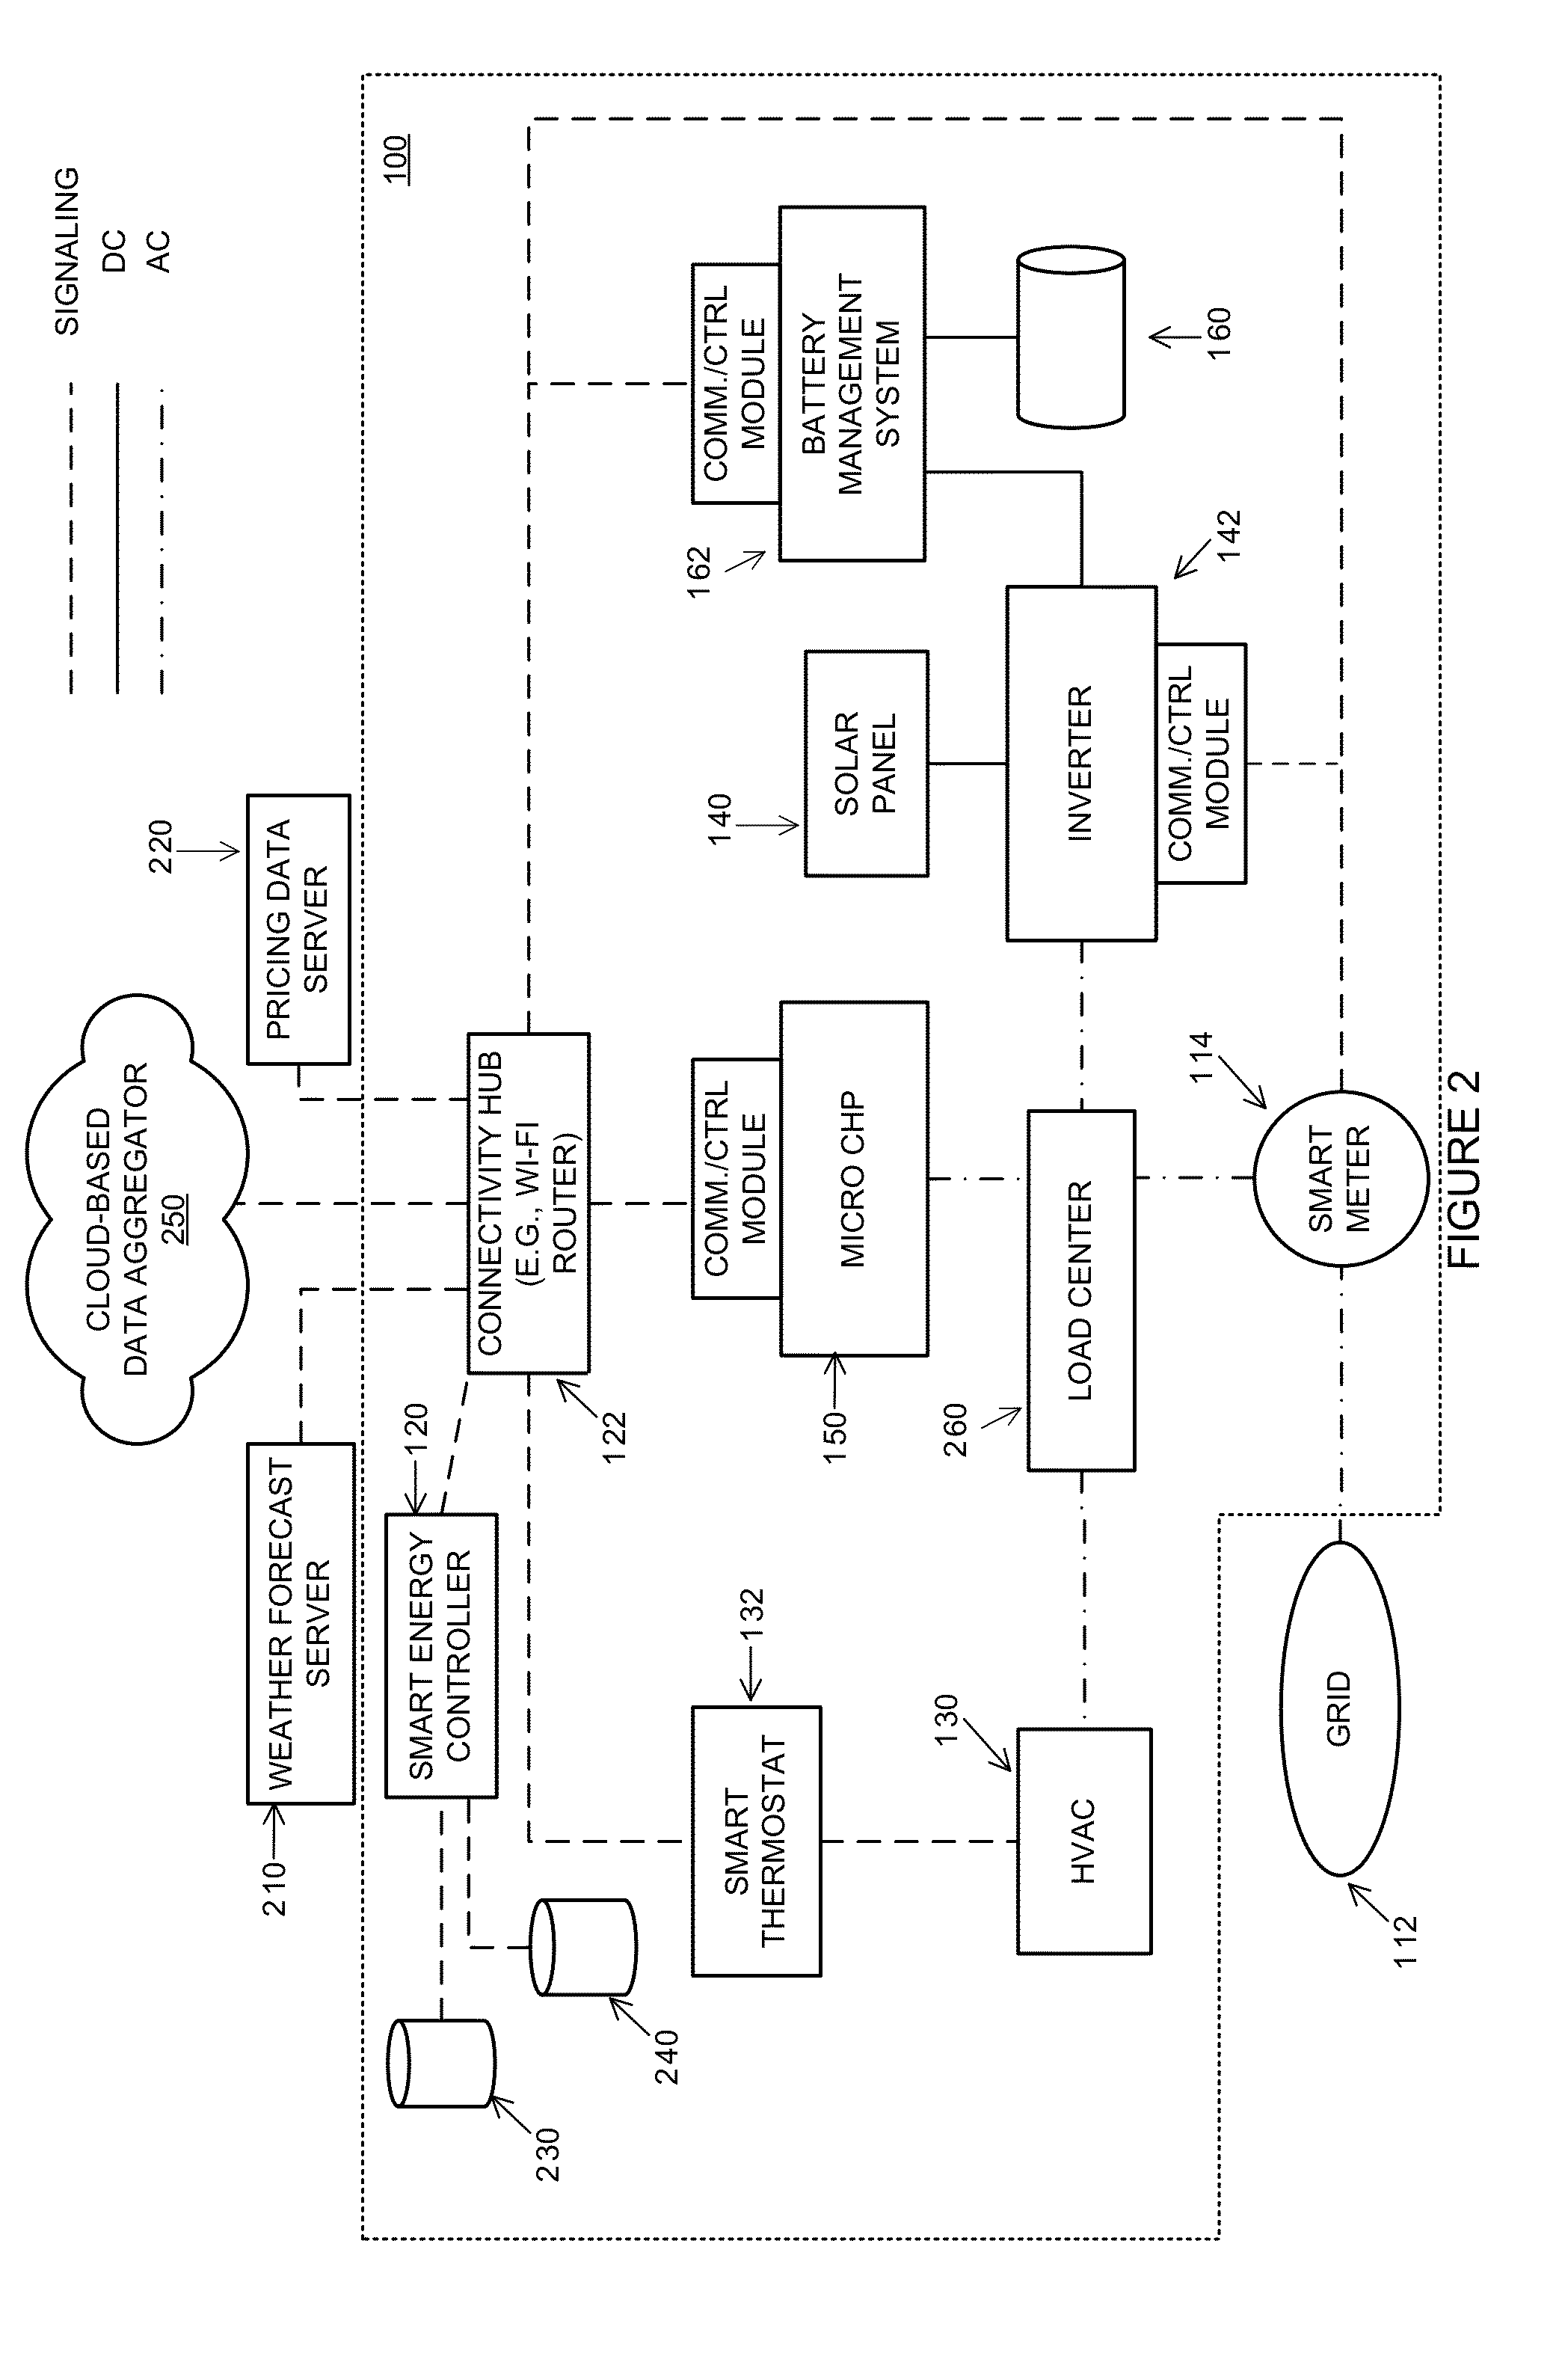 Systems and methods for energy cost optimization